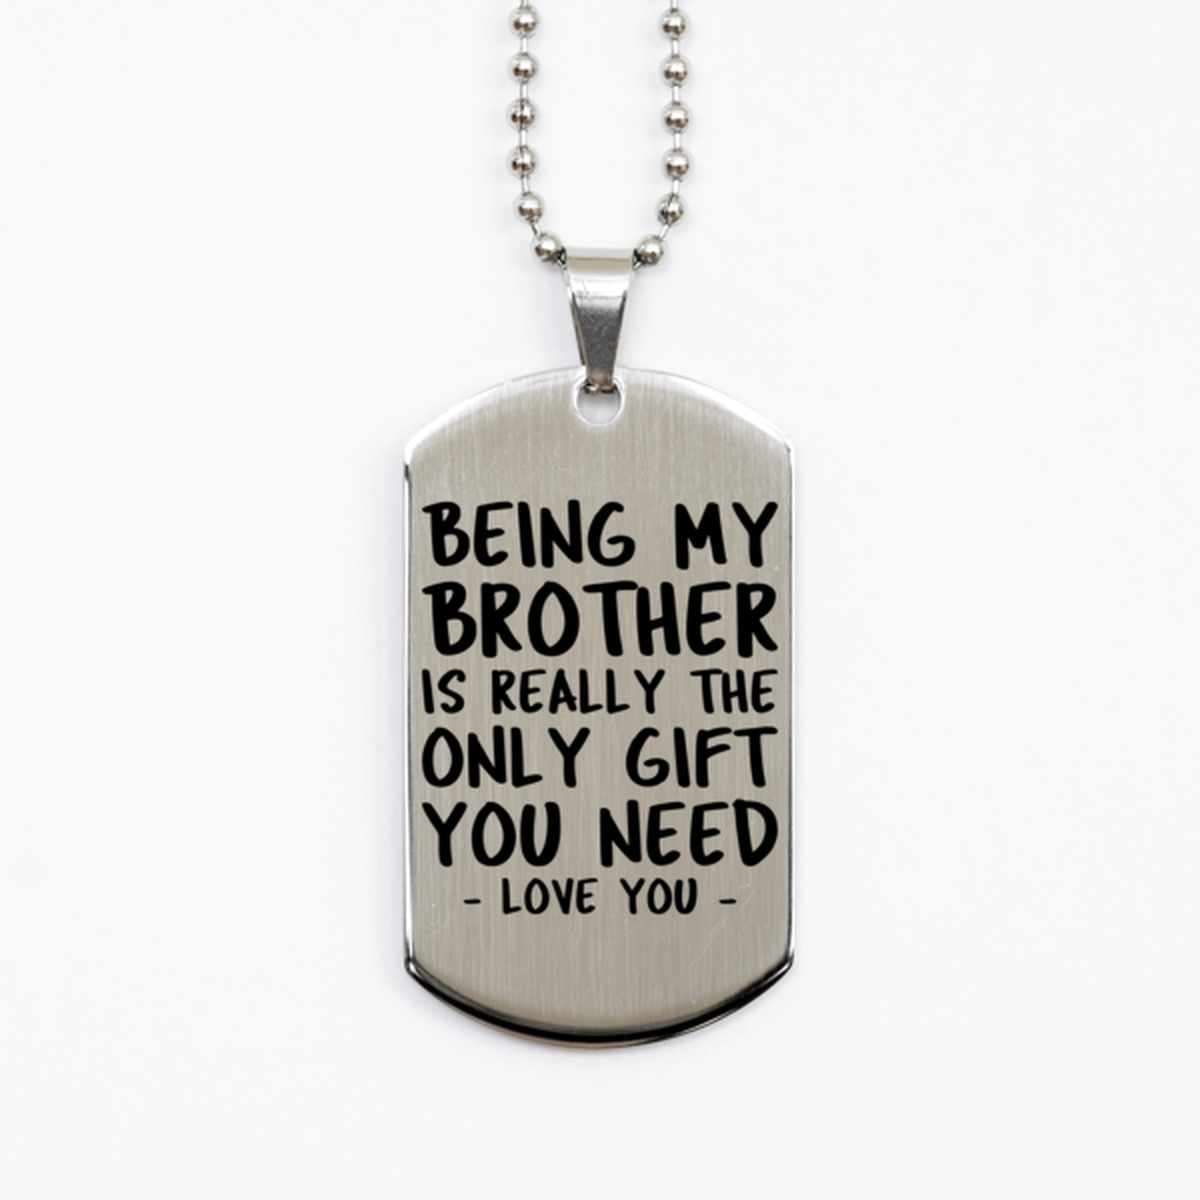 Funny Brother Silver Dog Tag Necklace, Being My Brother Is Really the Only Gift You Need, Best Birthday Gifts for Brother